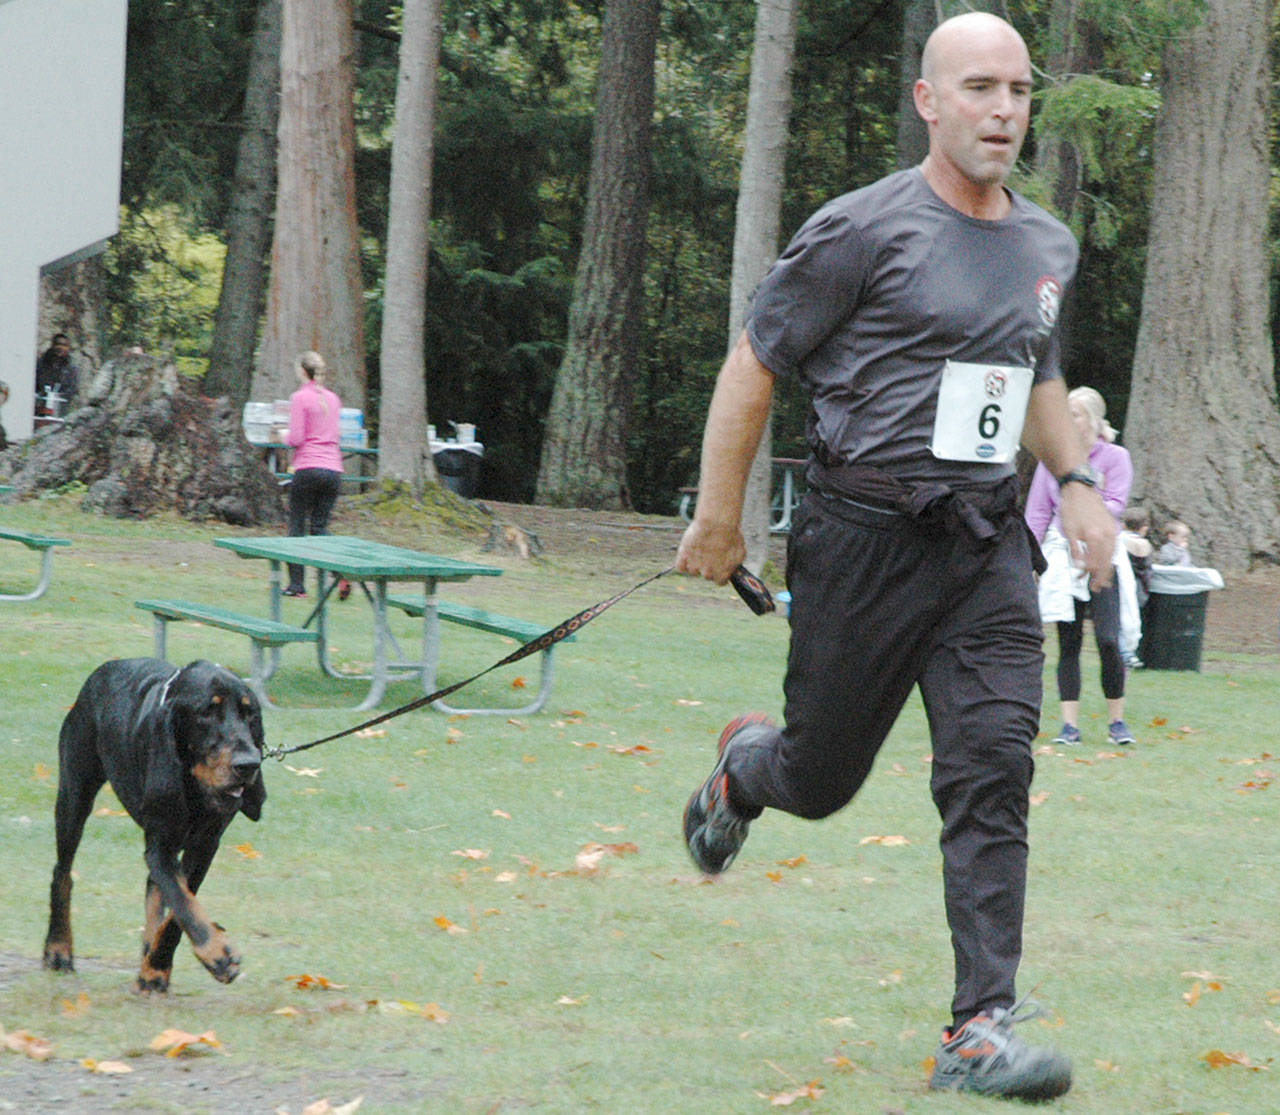 Enumclaw resident Steve Bannerot and his hound complete last year’s fun run, a benefit for Left Behind K9 Rescue, at Lake Wilderness. File photo by Kevin Hanson